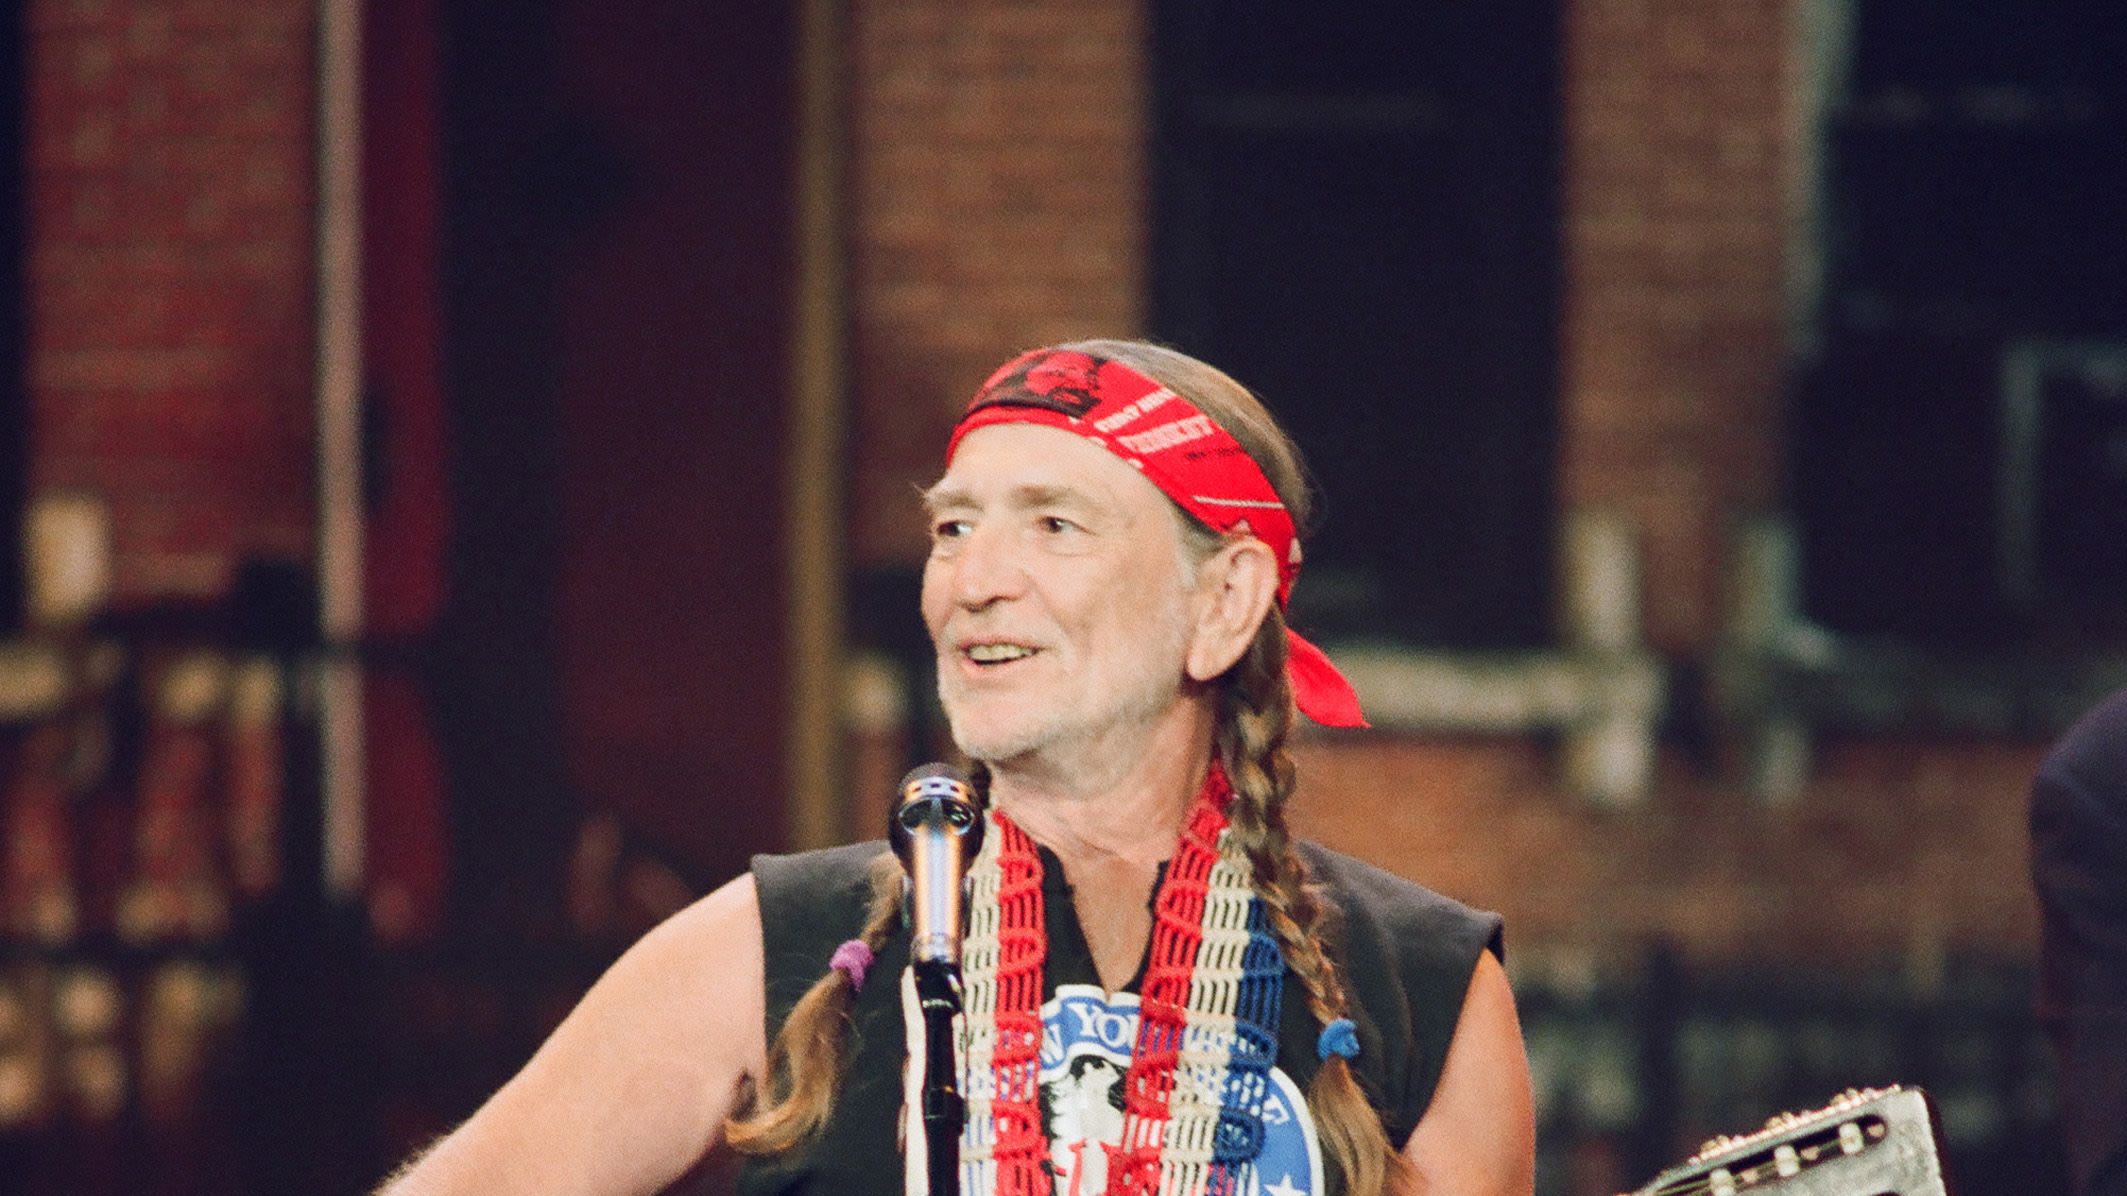 Willie Nelson Will Celebrate 91st Birthday at Stagecoach! Here Are Some of His Best Songs